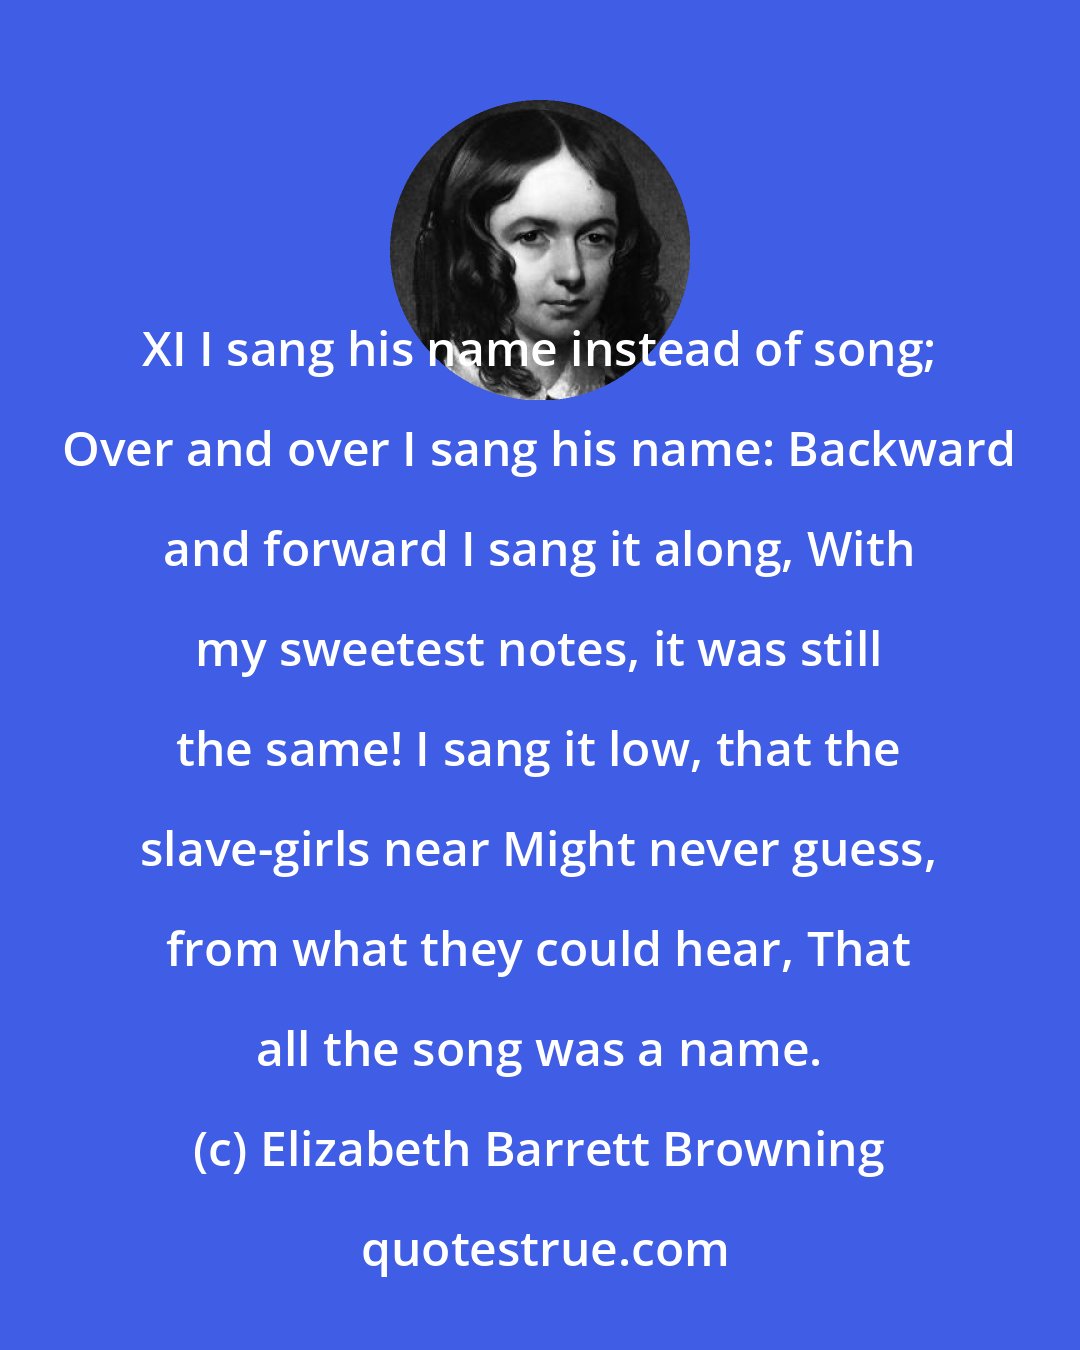 Elizabeth Barrett Browning: XI I sang his name instead of song; Over and over I sang his name: Backward and forward I sang it along, With my sweetest notes, it was still the same! I sang it low, that the slave-girls near Might never guess, from what they could hear, That all the song was a name.